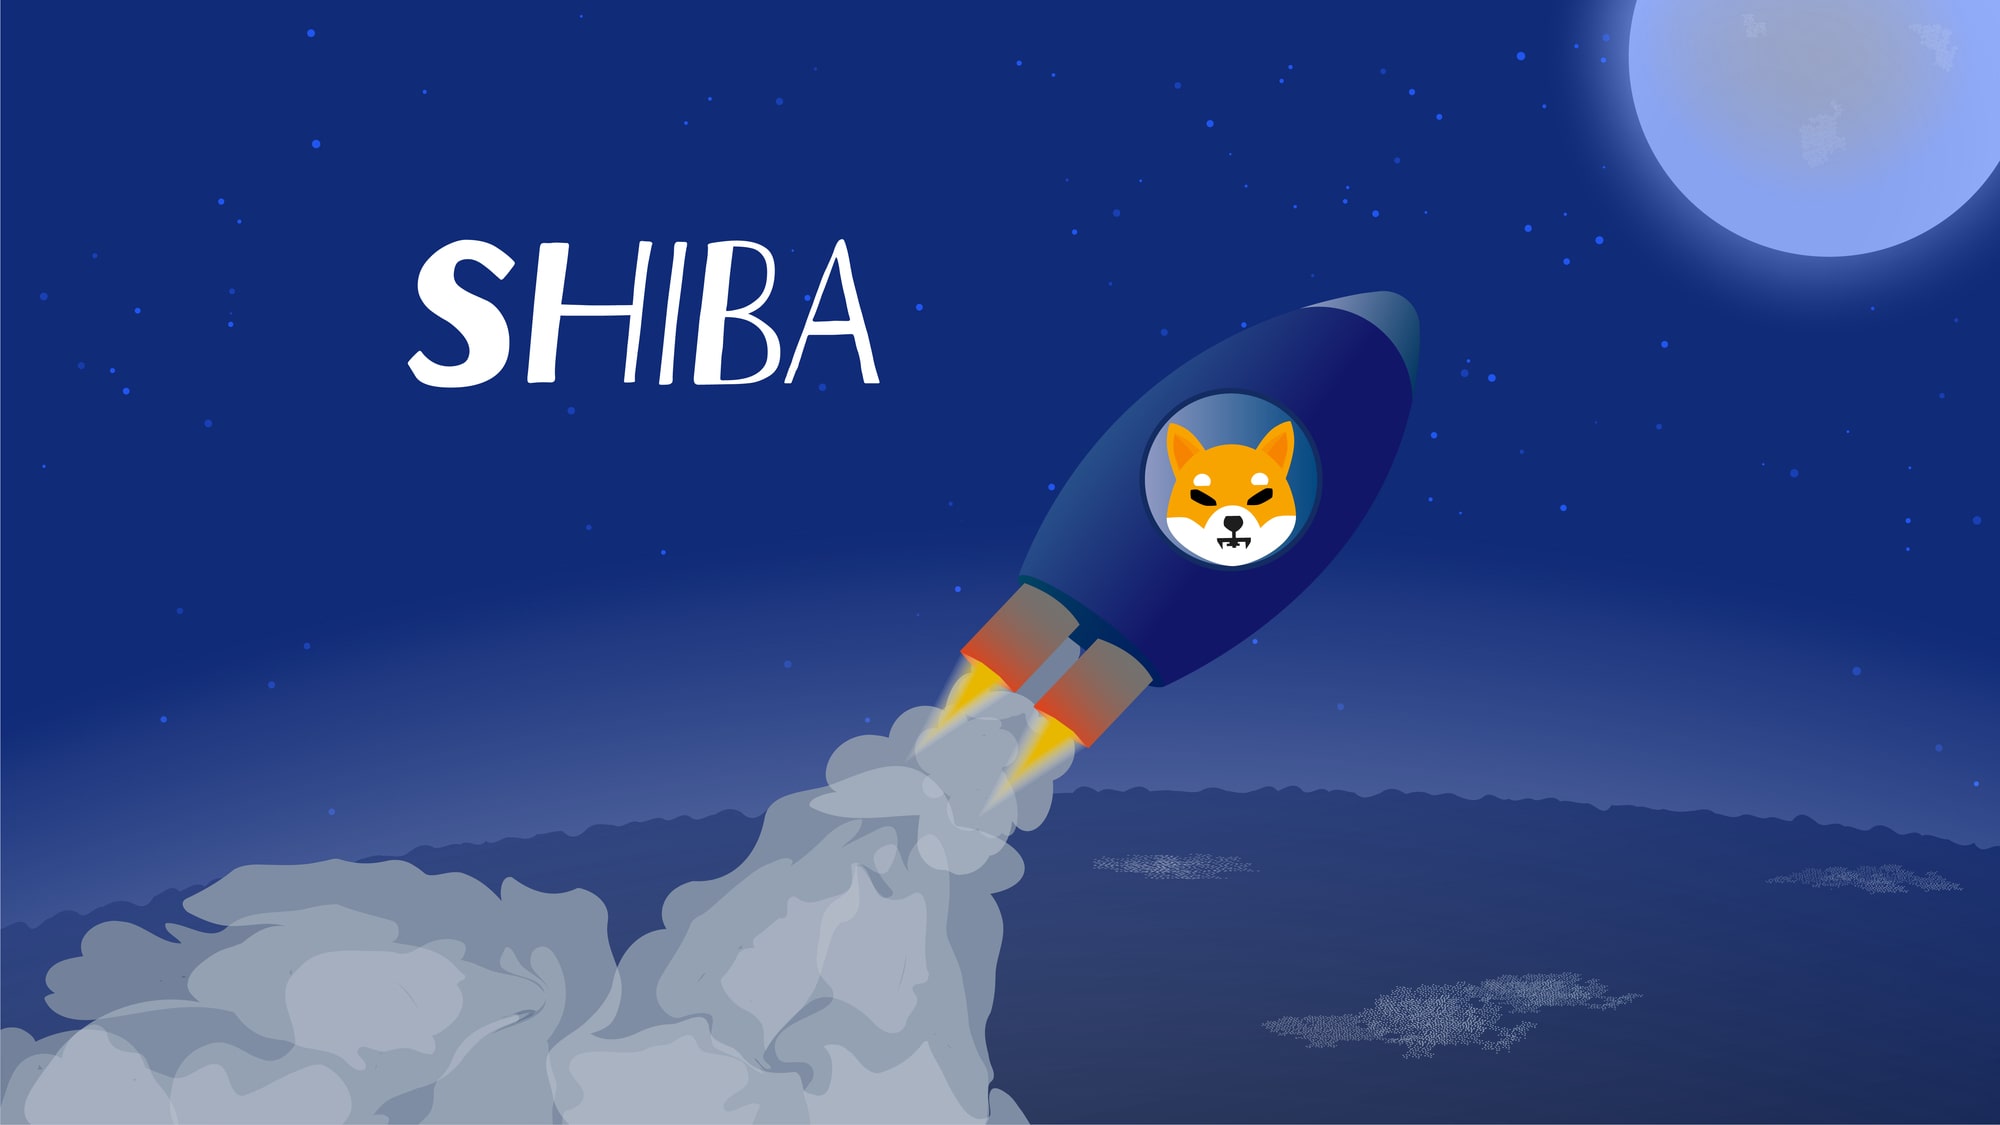 Shiba Inu enters top 20 coins after 300% weekly surge